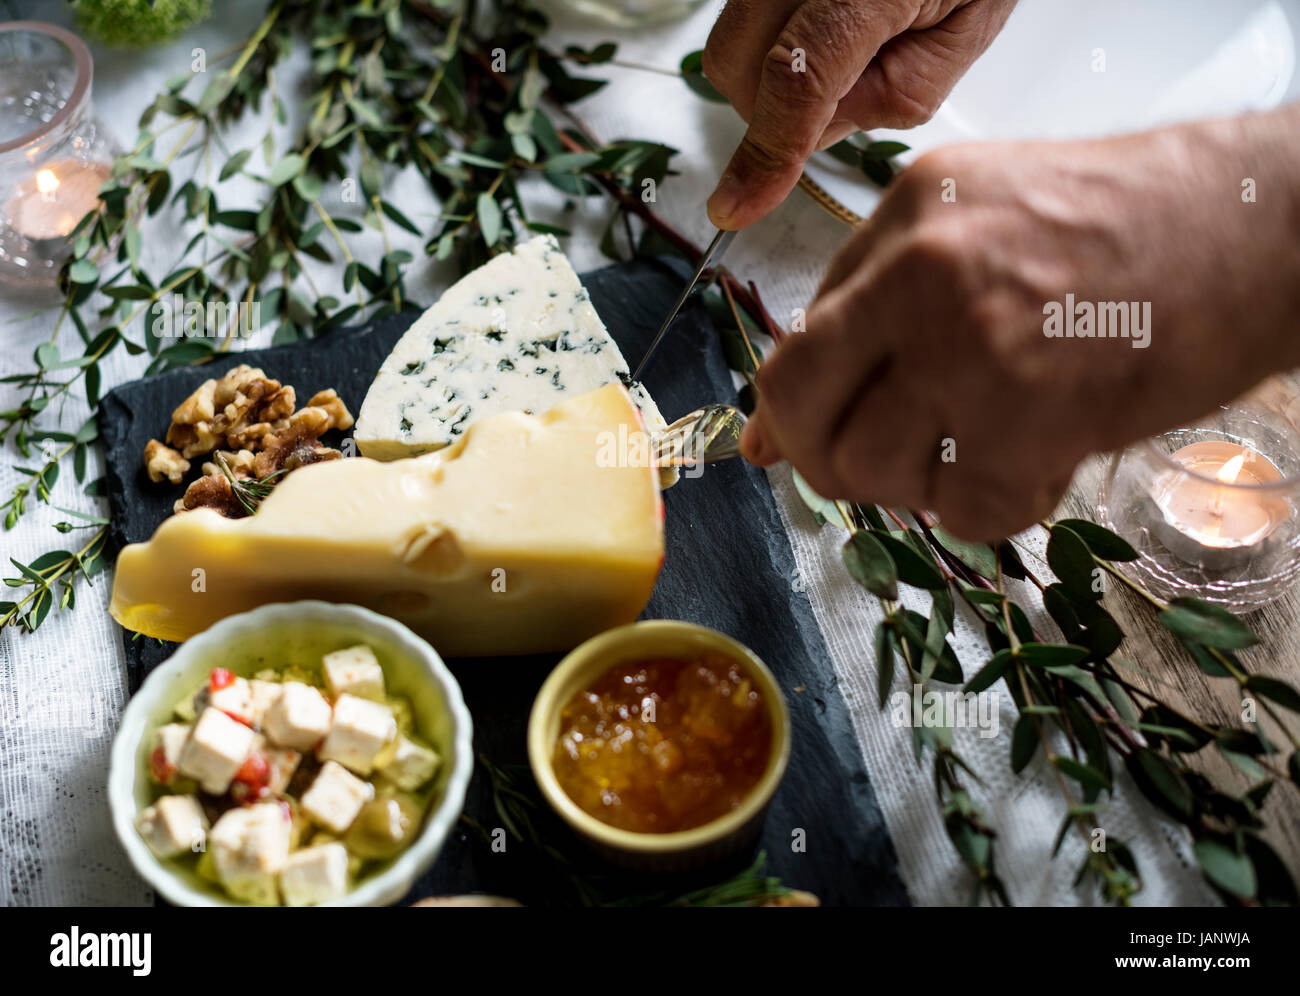 People Hands With Cutlery Getting Cutting Cheese Stock Photo